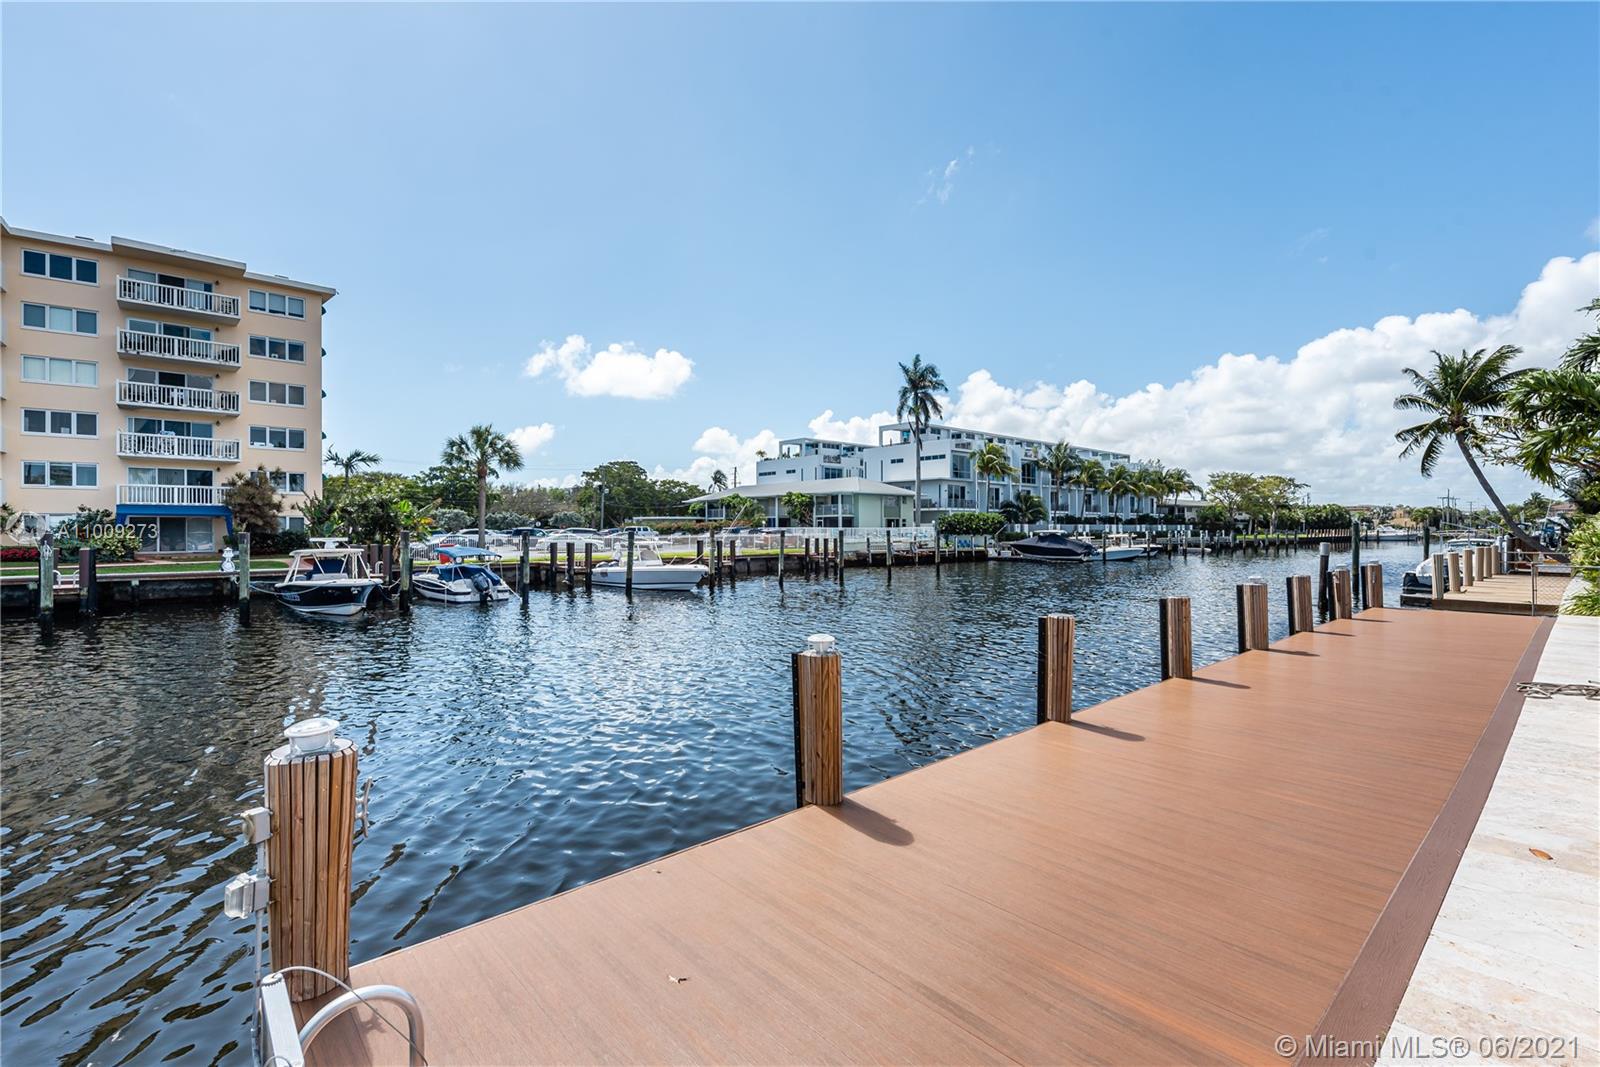 Tenant in place paying $6,700 per month until April 2022. Pompano Beach gem is the perfect dream home for yachters and people who enjoy outdoors. Prime 3/2 waterfront pool home on cul-du-sac w/ ideal setting for entertaining inside or out. Spacious pool deck, hot tub and oversized screened-in patio with shutters (can be easily enclosed for added living area). Baths are recently renovated and electrical panel is new. Brand new dock stretches 80' along water to moor your yacht on widest canal. Only 4 houses and 320' from the Intracoastal w/ no fixed bridges so watch the boat parade. Master bedroom and kitchen overlook the pool and water w/ impact glass. Gas cooking available. 5 minute walk or bike ride to the beach. Enjoy cafes/restaurants at Lauderdale-by-the-Beach w/ live music nightly.